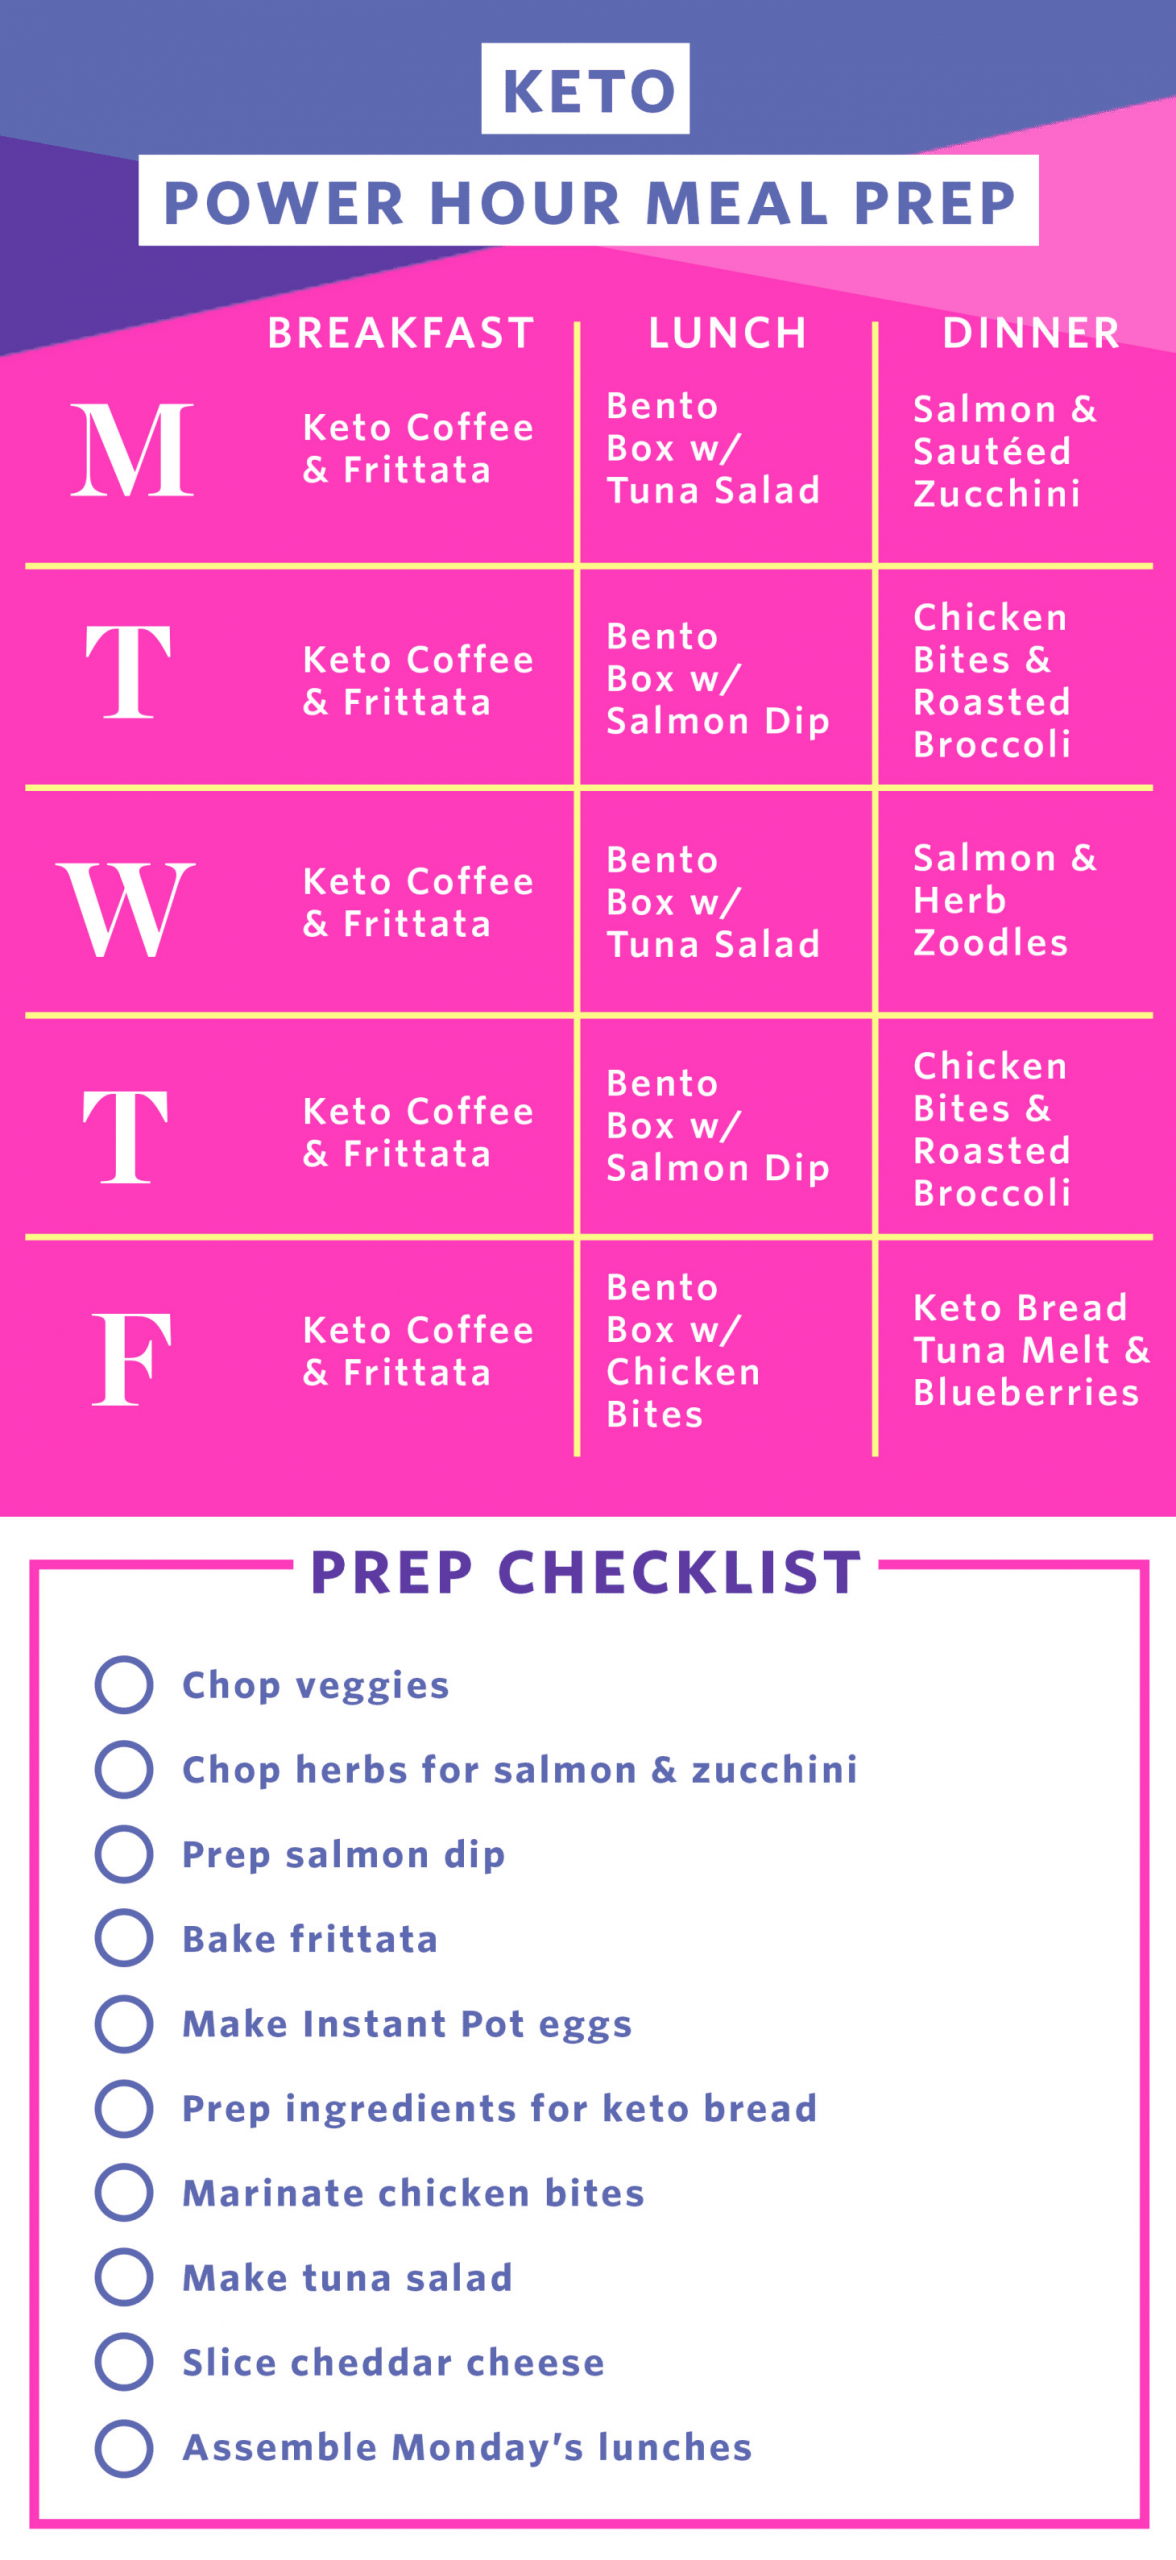 Keto Diet For Beginners Meal Plan With Grocery List Week 1
 Fast Keto Meal Prep in Under 2 Hours